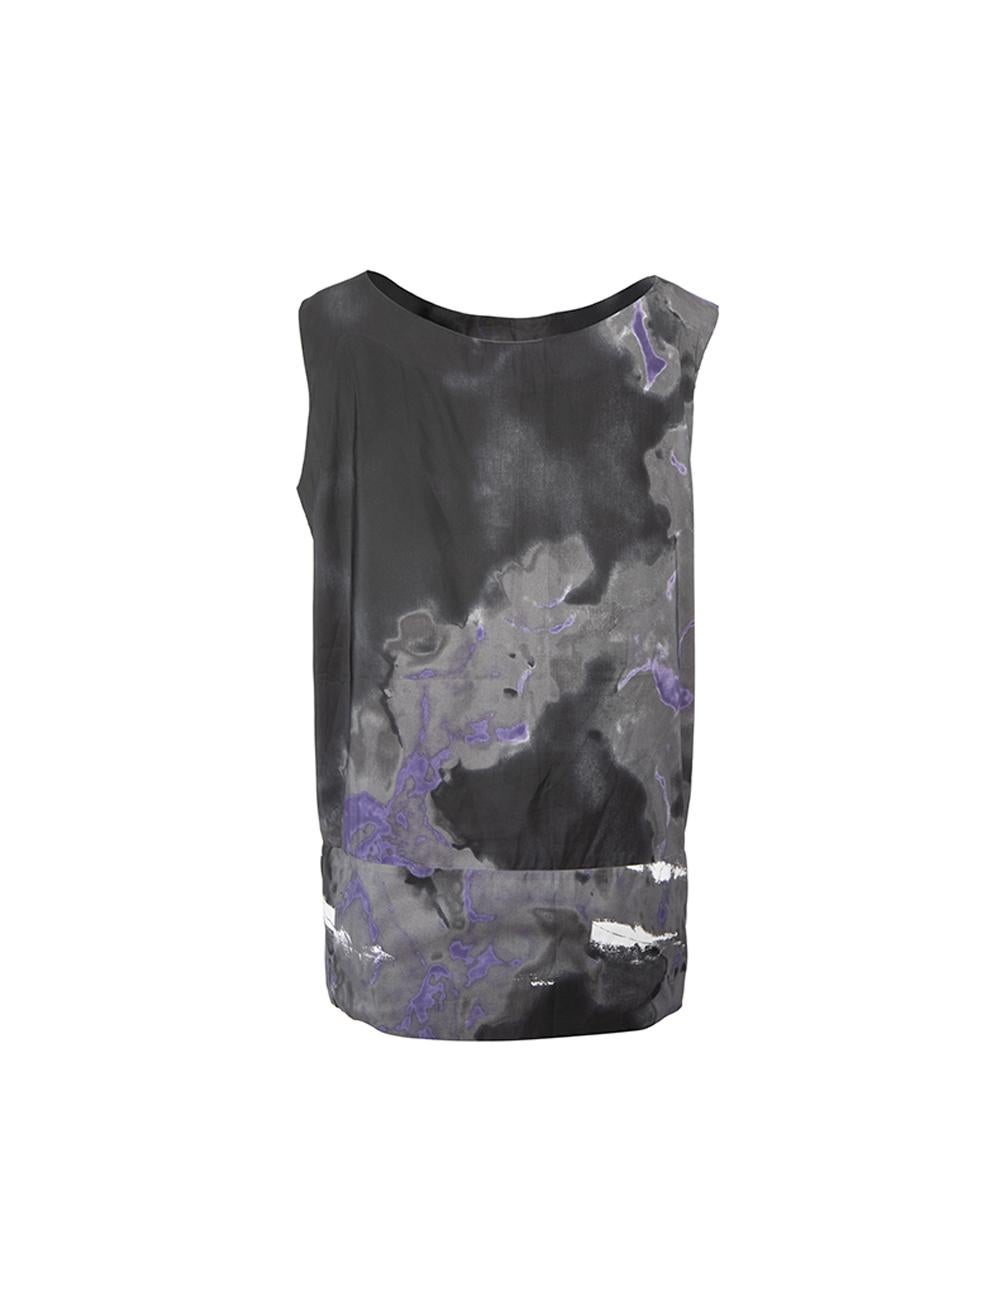 Marni Women's Tie-Dyed Print Sleeveless Top In Good Condition For Sale In London, GB